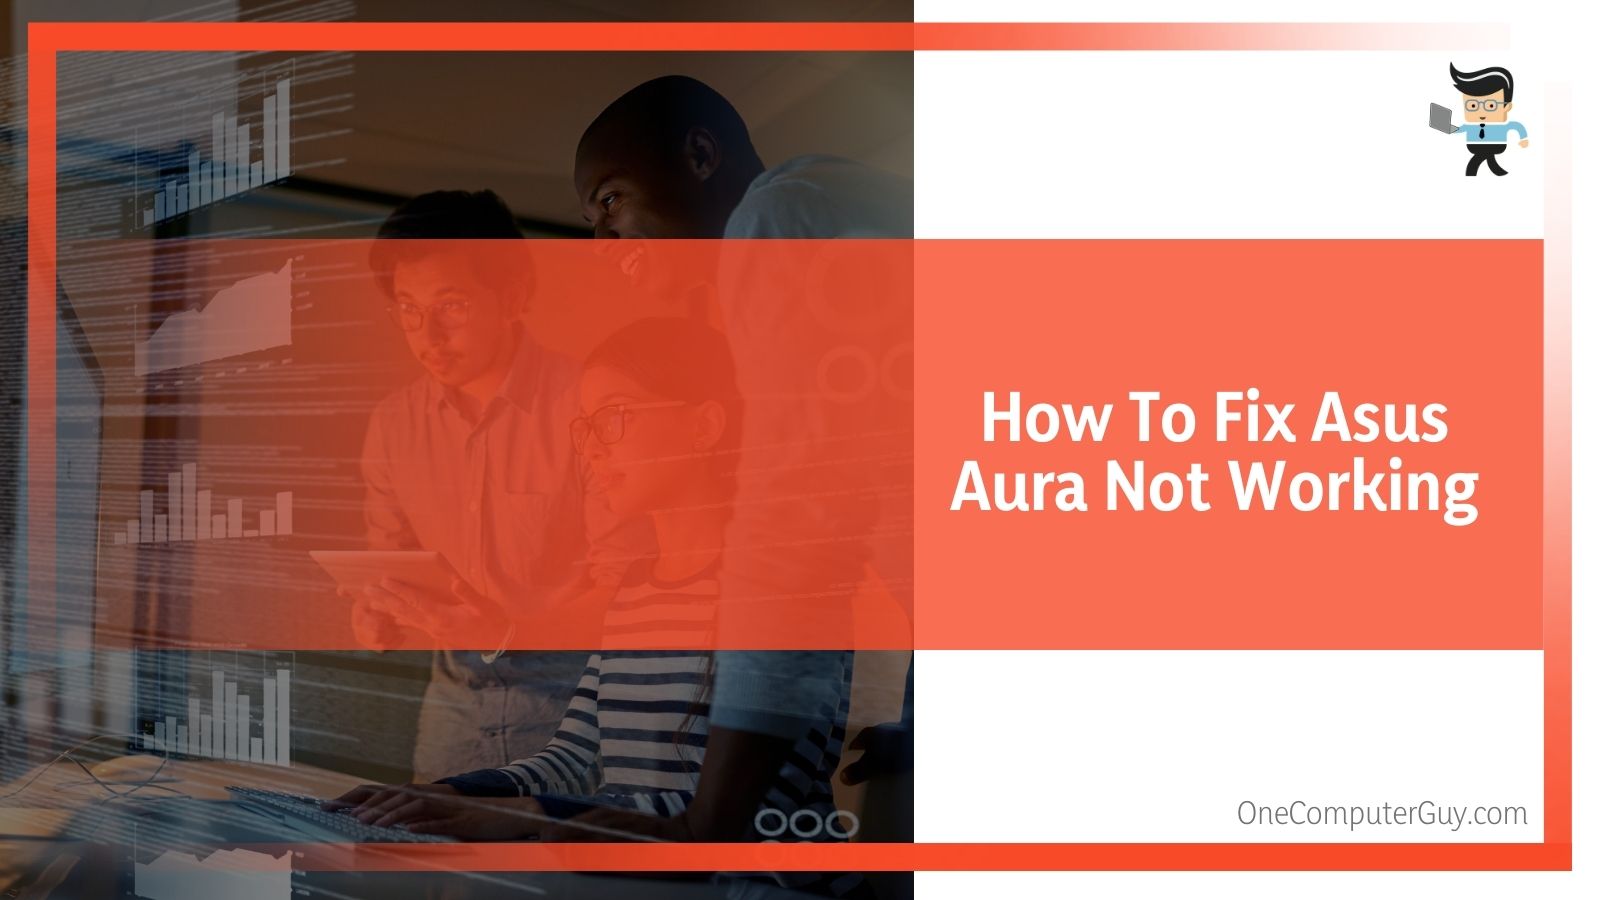 How To Fix Asus Aura Not Working